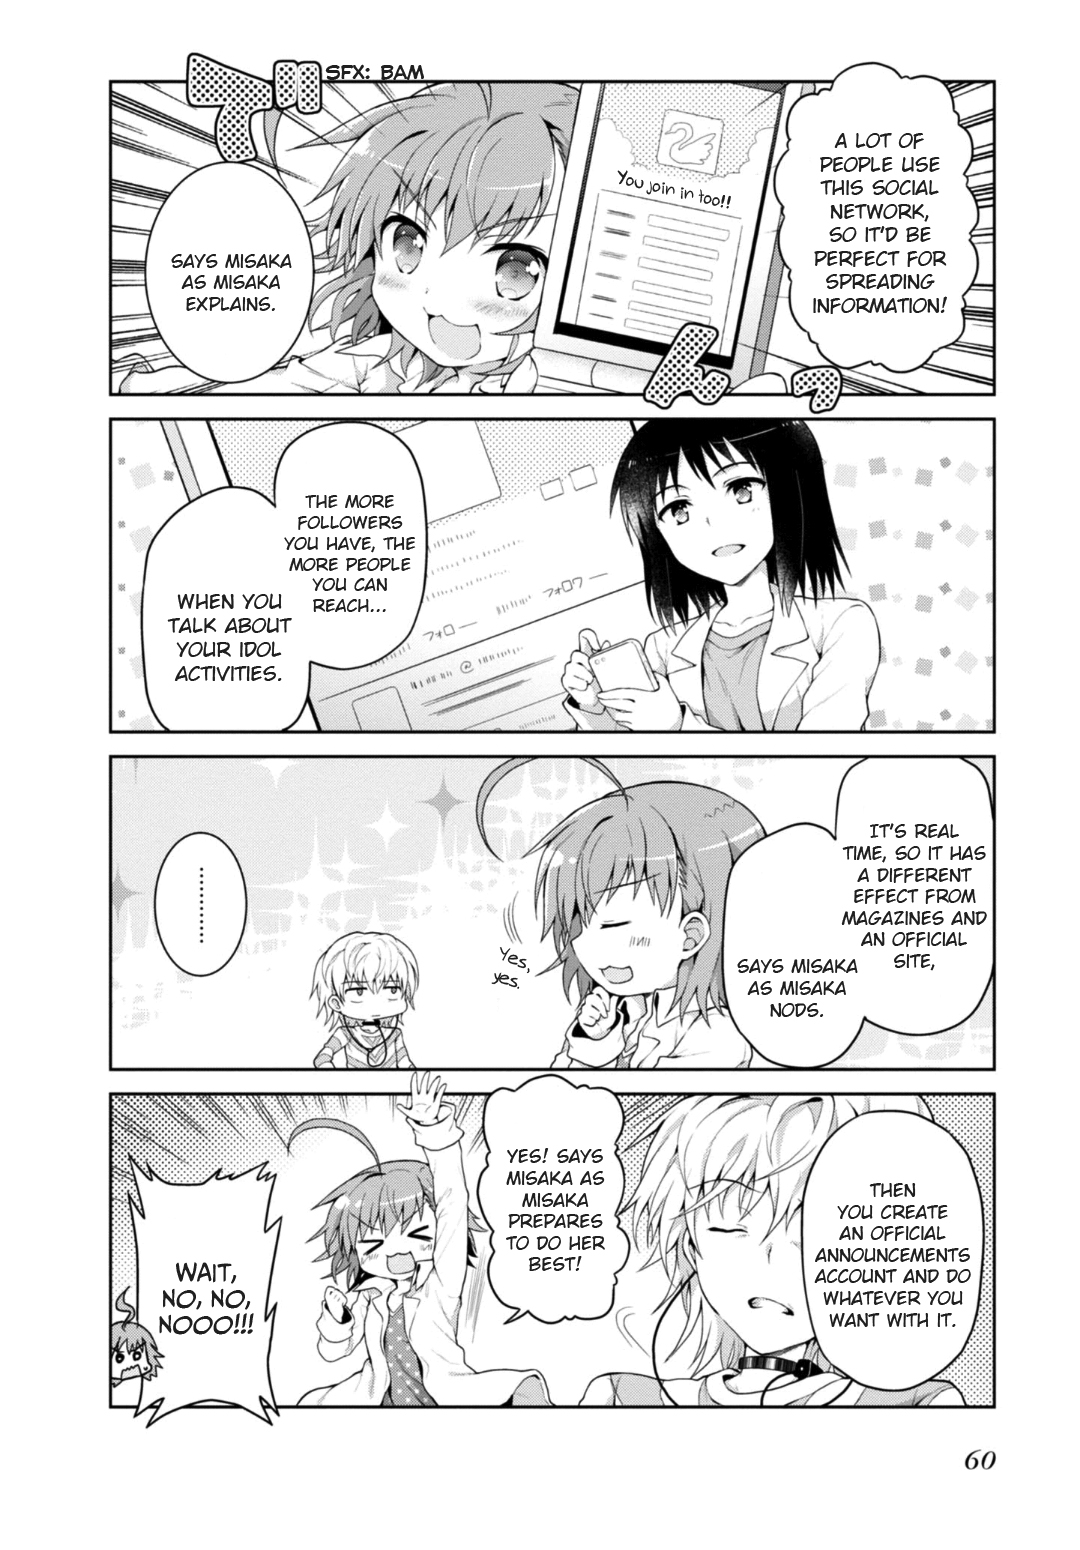 A Certain Idol Accelerator - Page 2